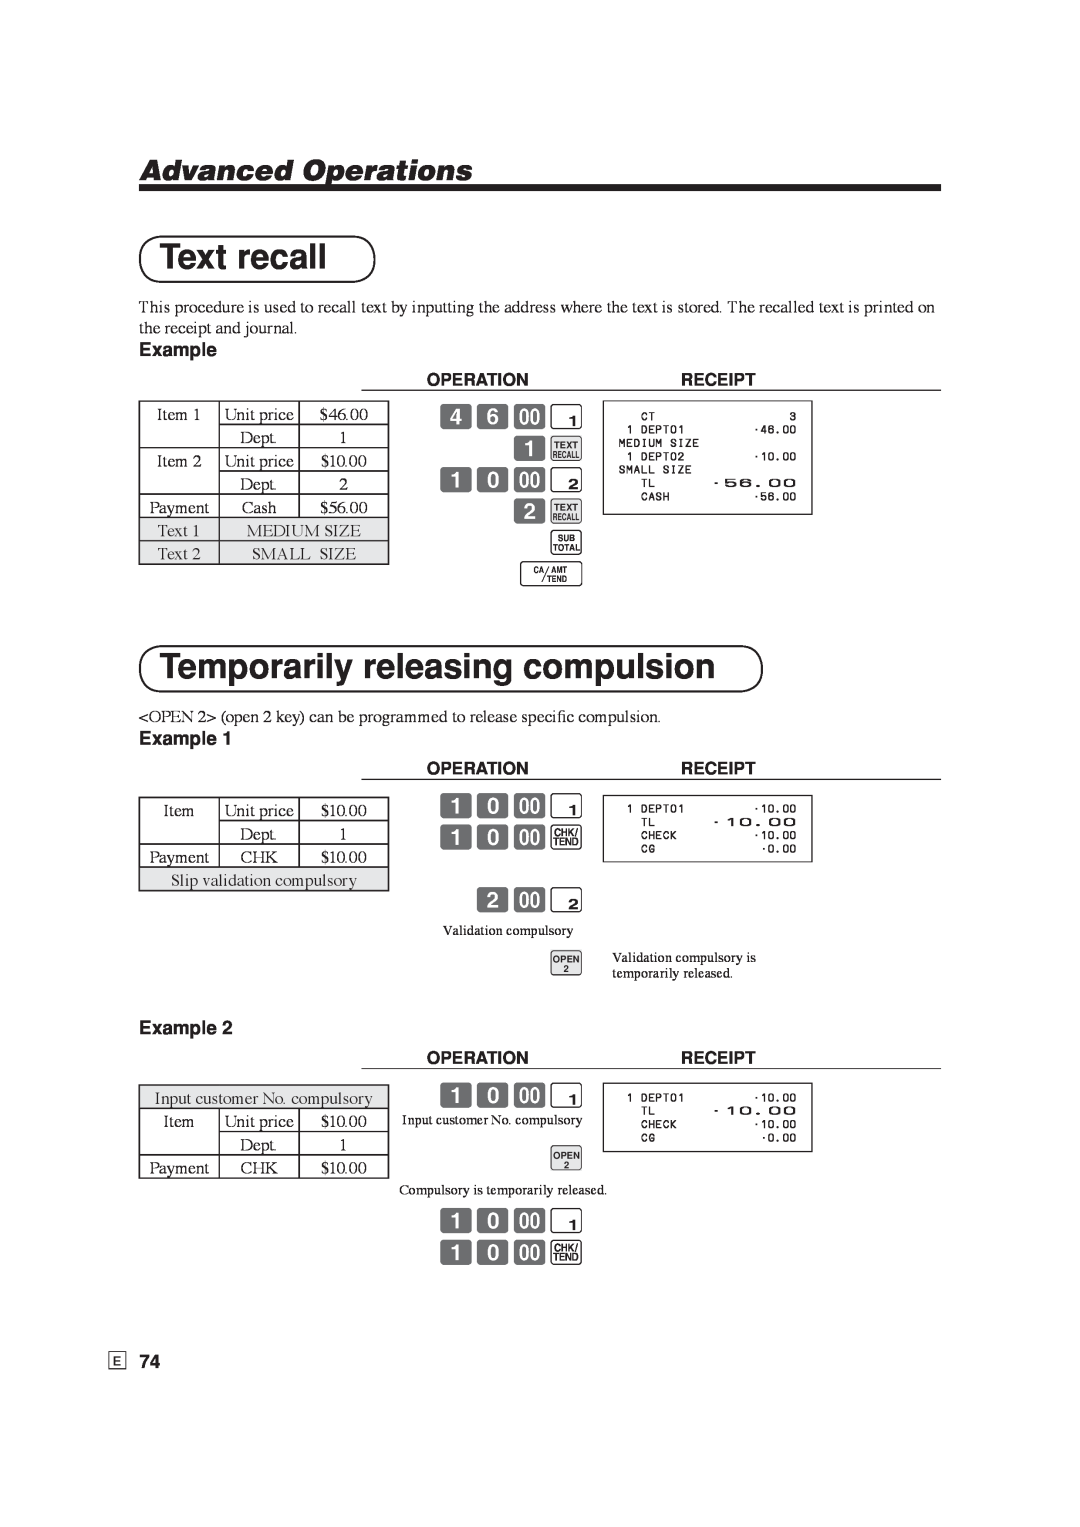 Casio SE-S6000, SE-C6000 user manual Text recall, Temporarily releasing compulsion, 10-k, Advanced Operations, Example 